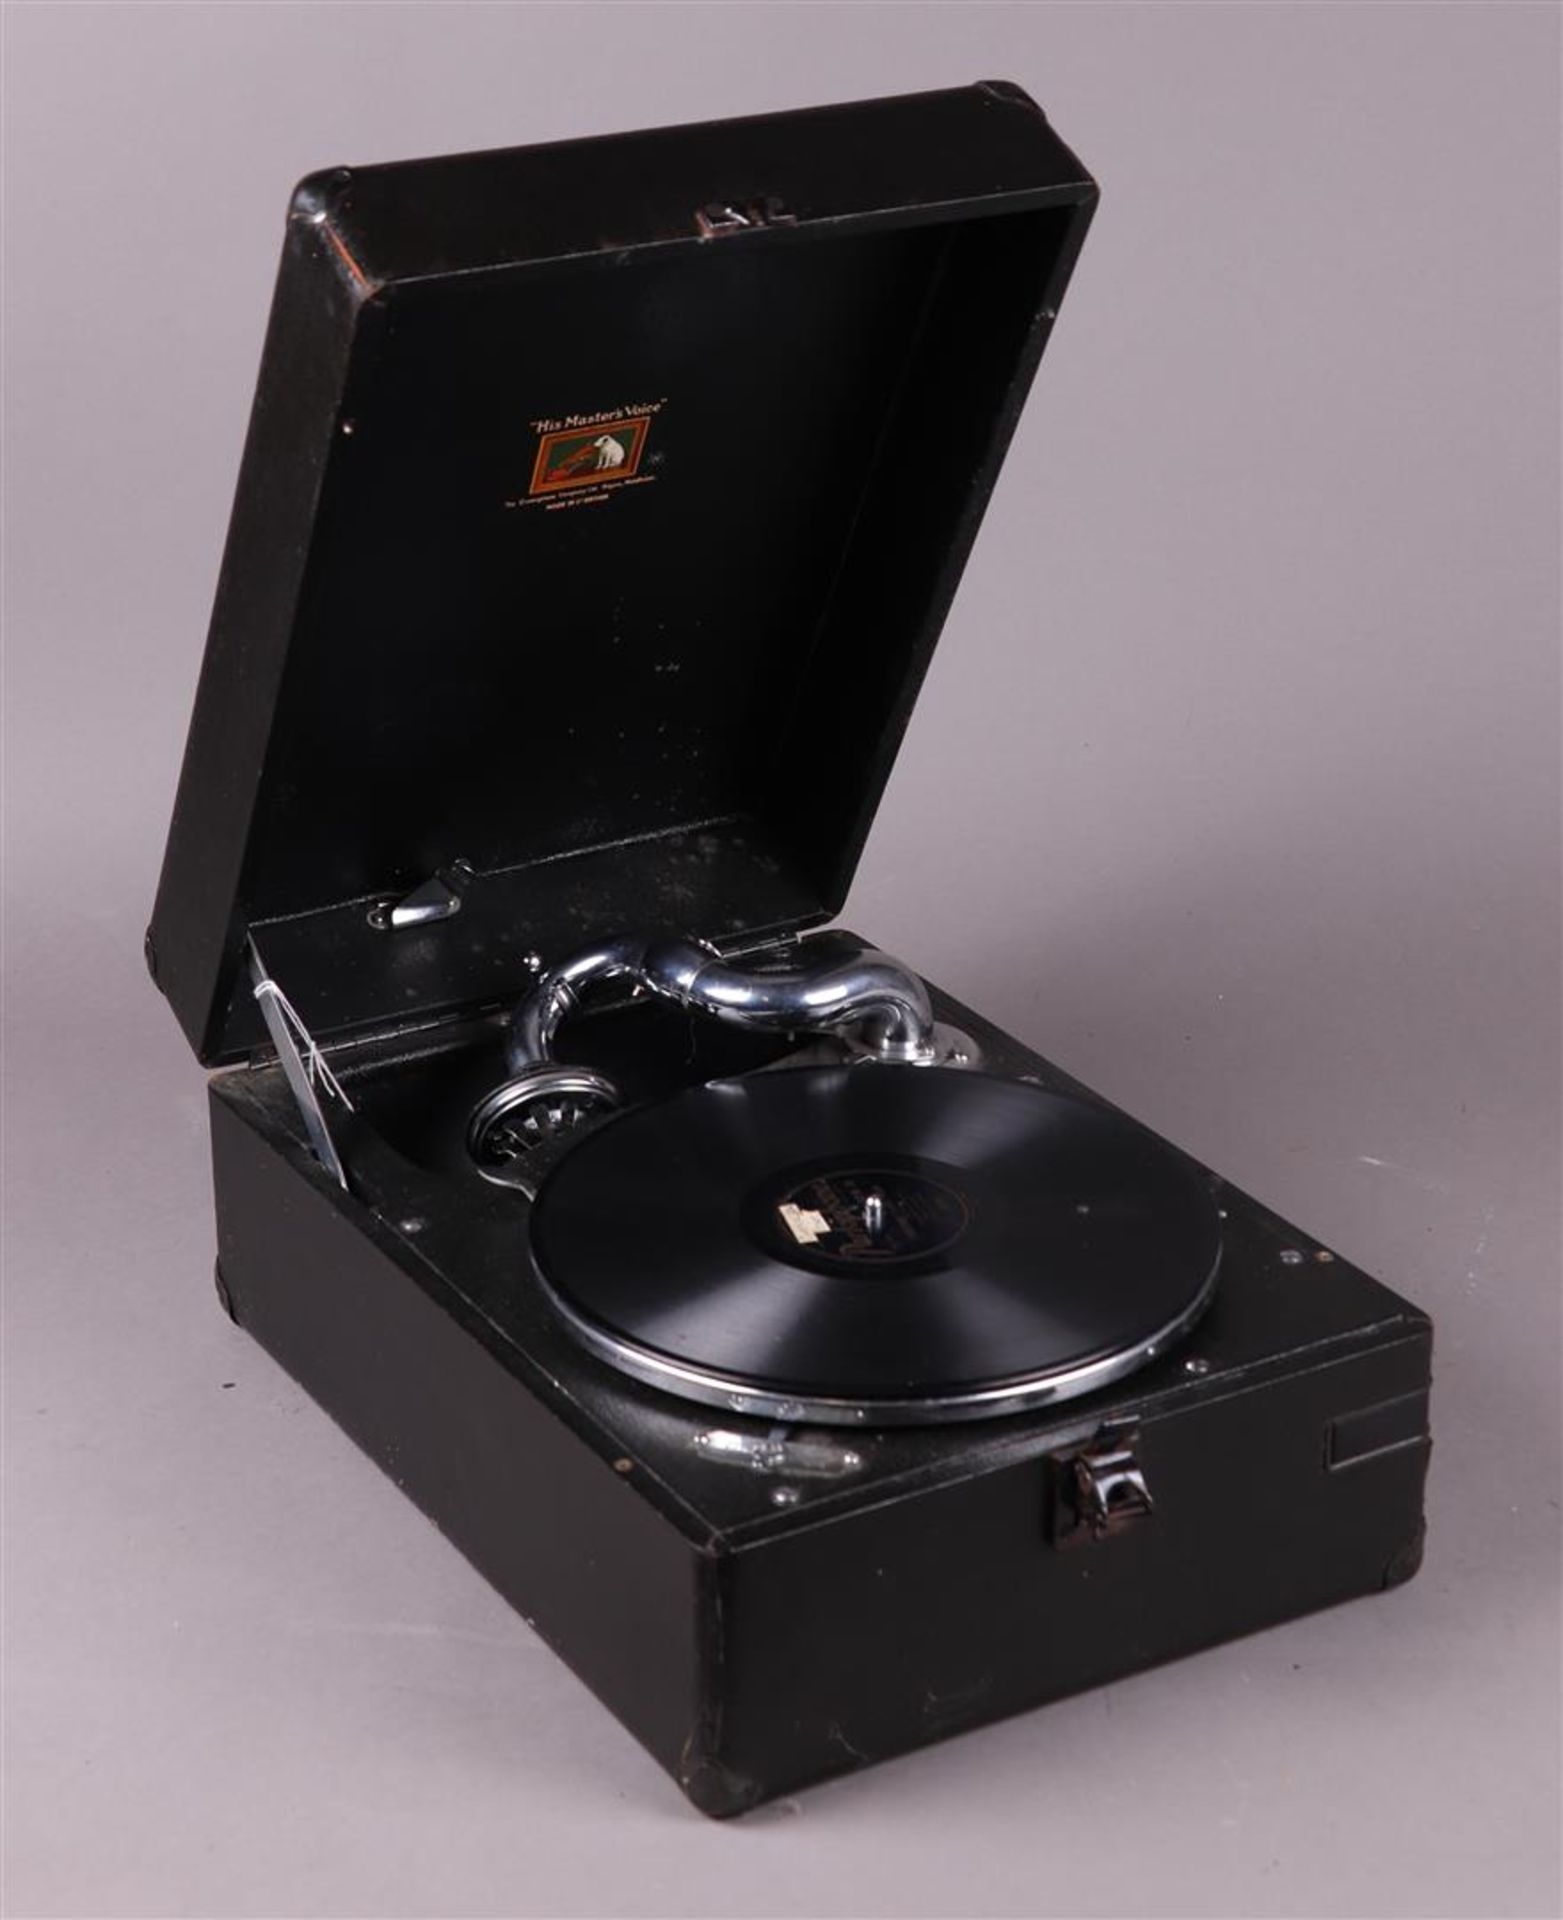 A 'His Master's Voice' suitcase gramophone.